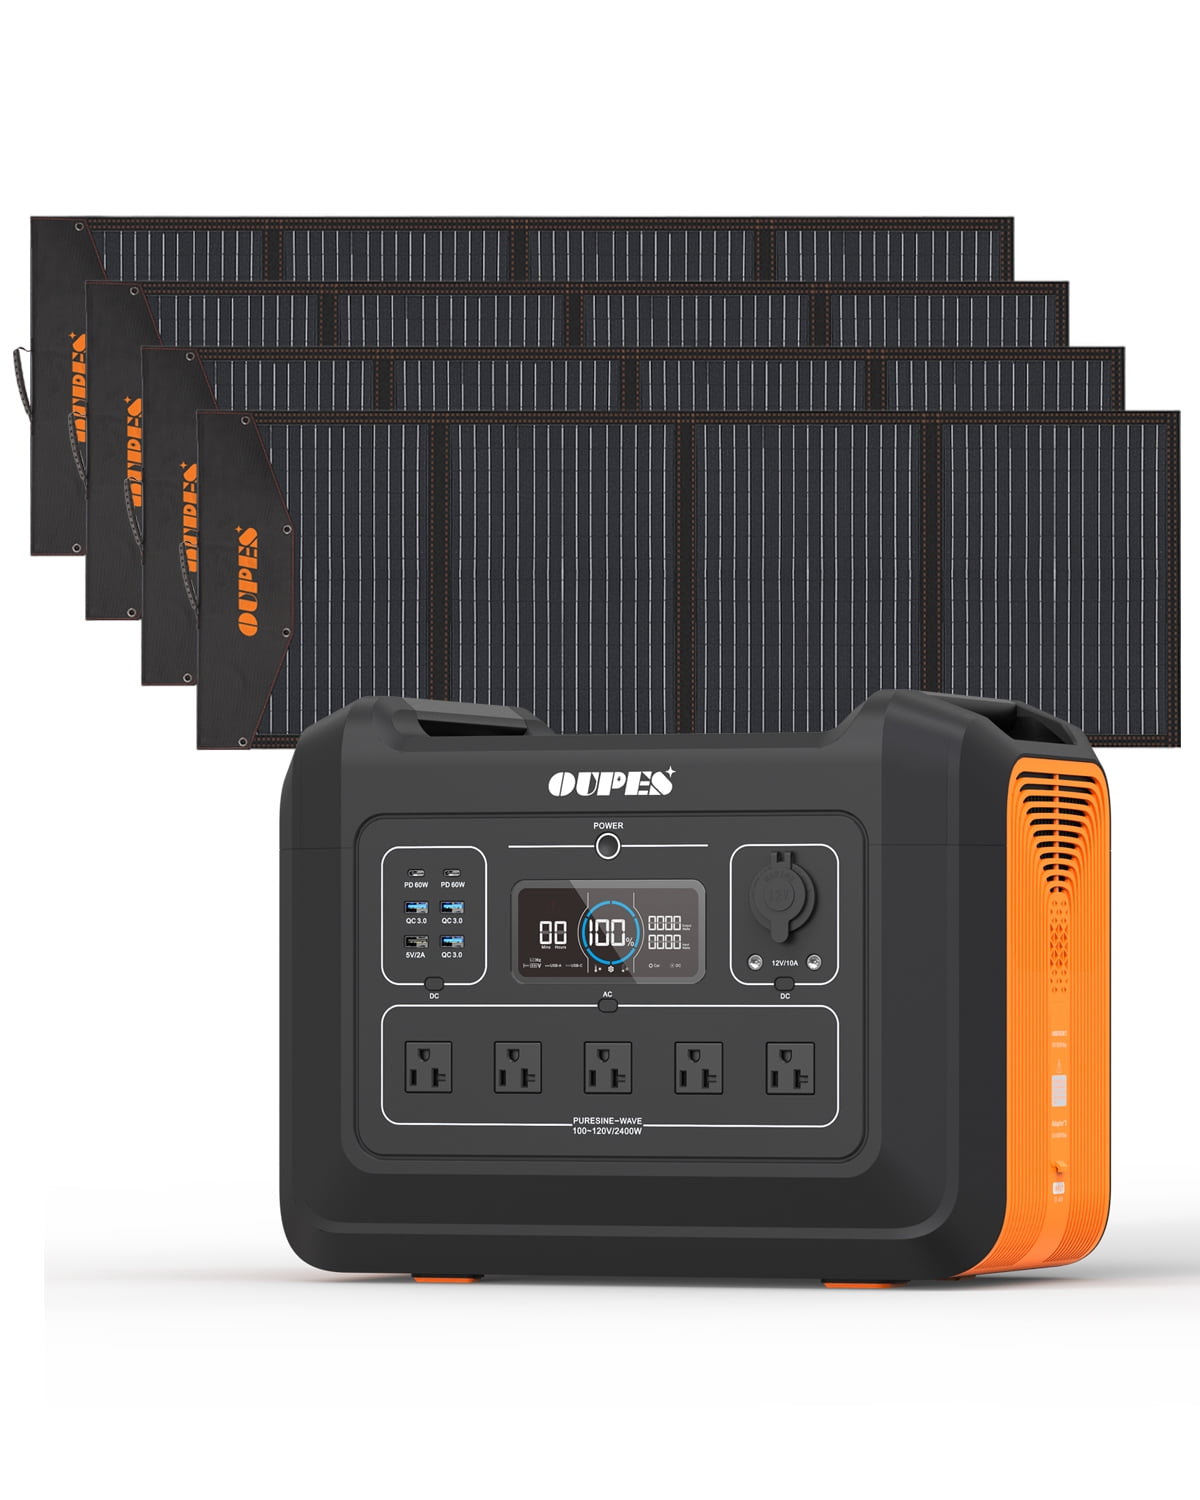 OUPES 600W Portable Power Station - Outdoor Emergency Power